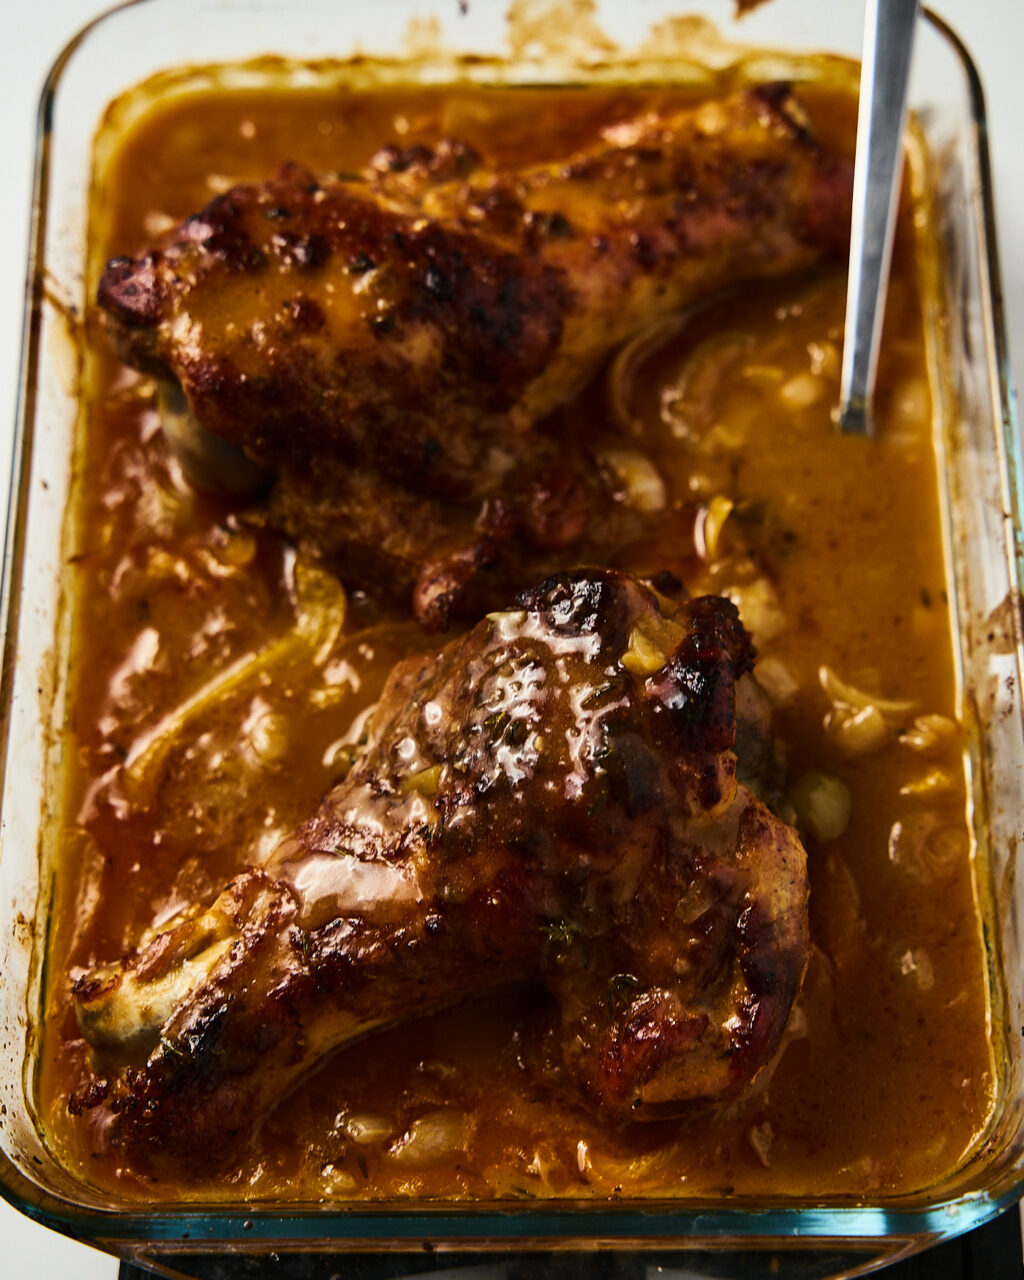 Braised and baked turkey wings in gravy